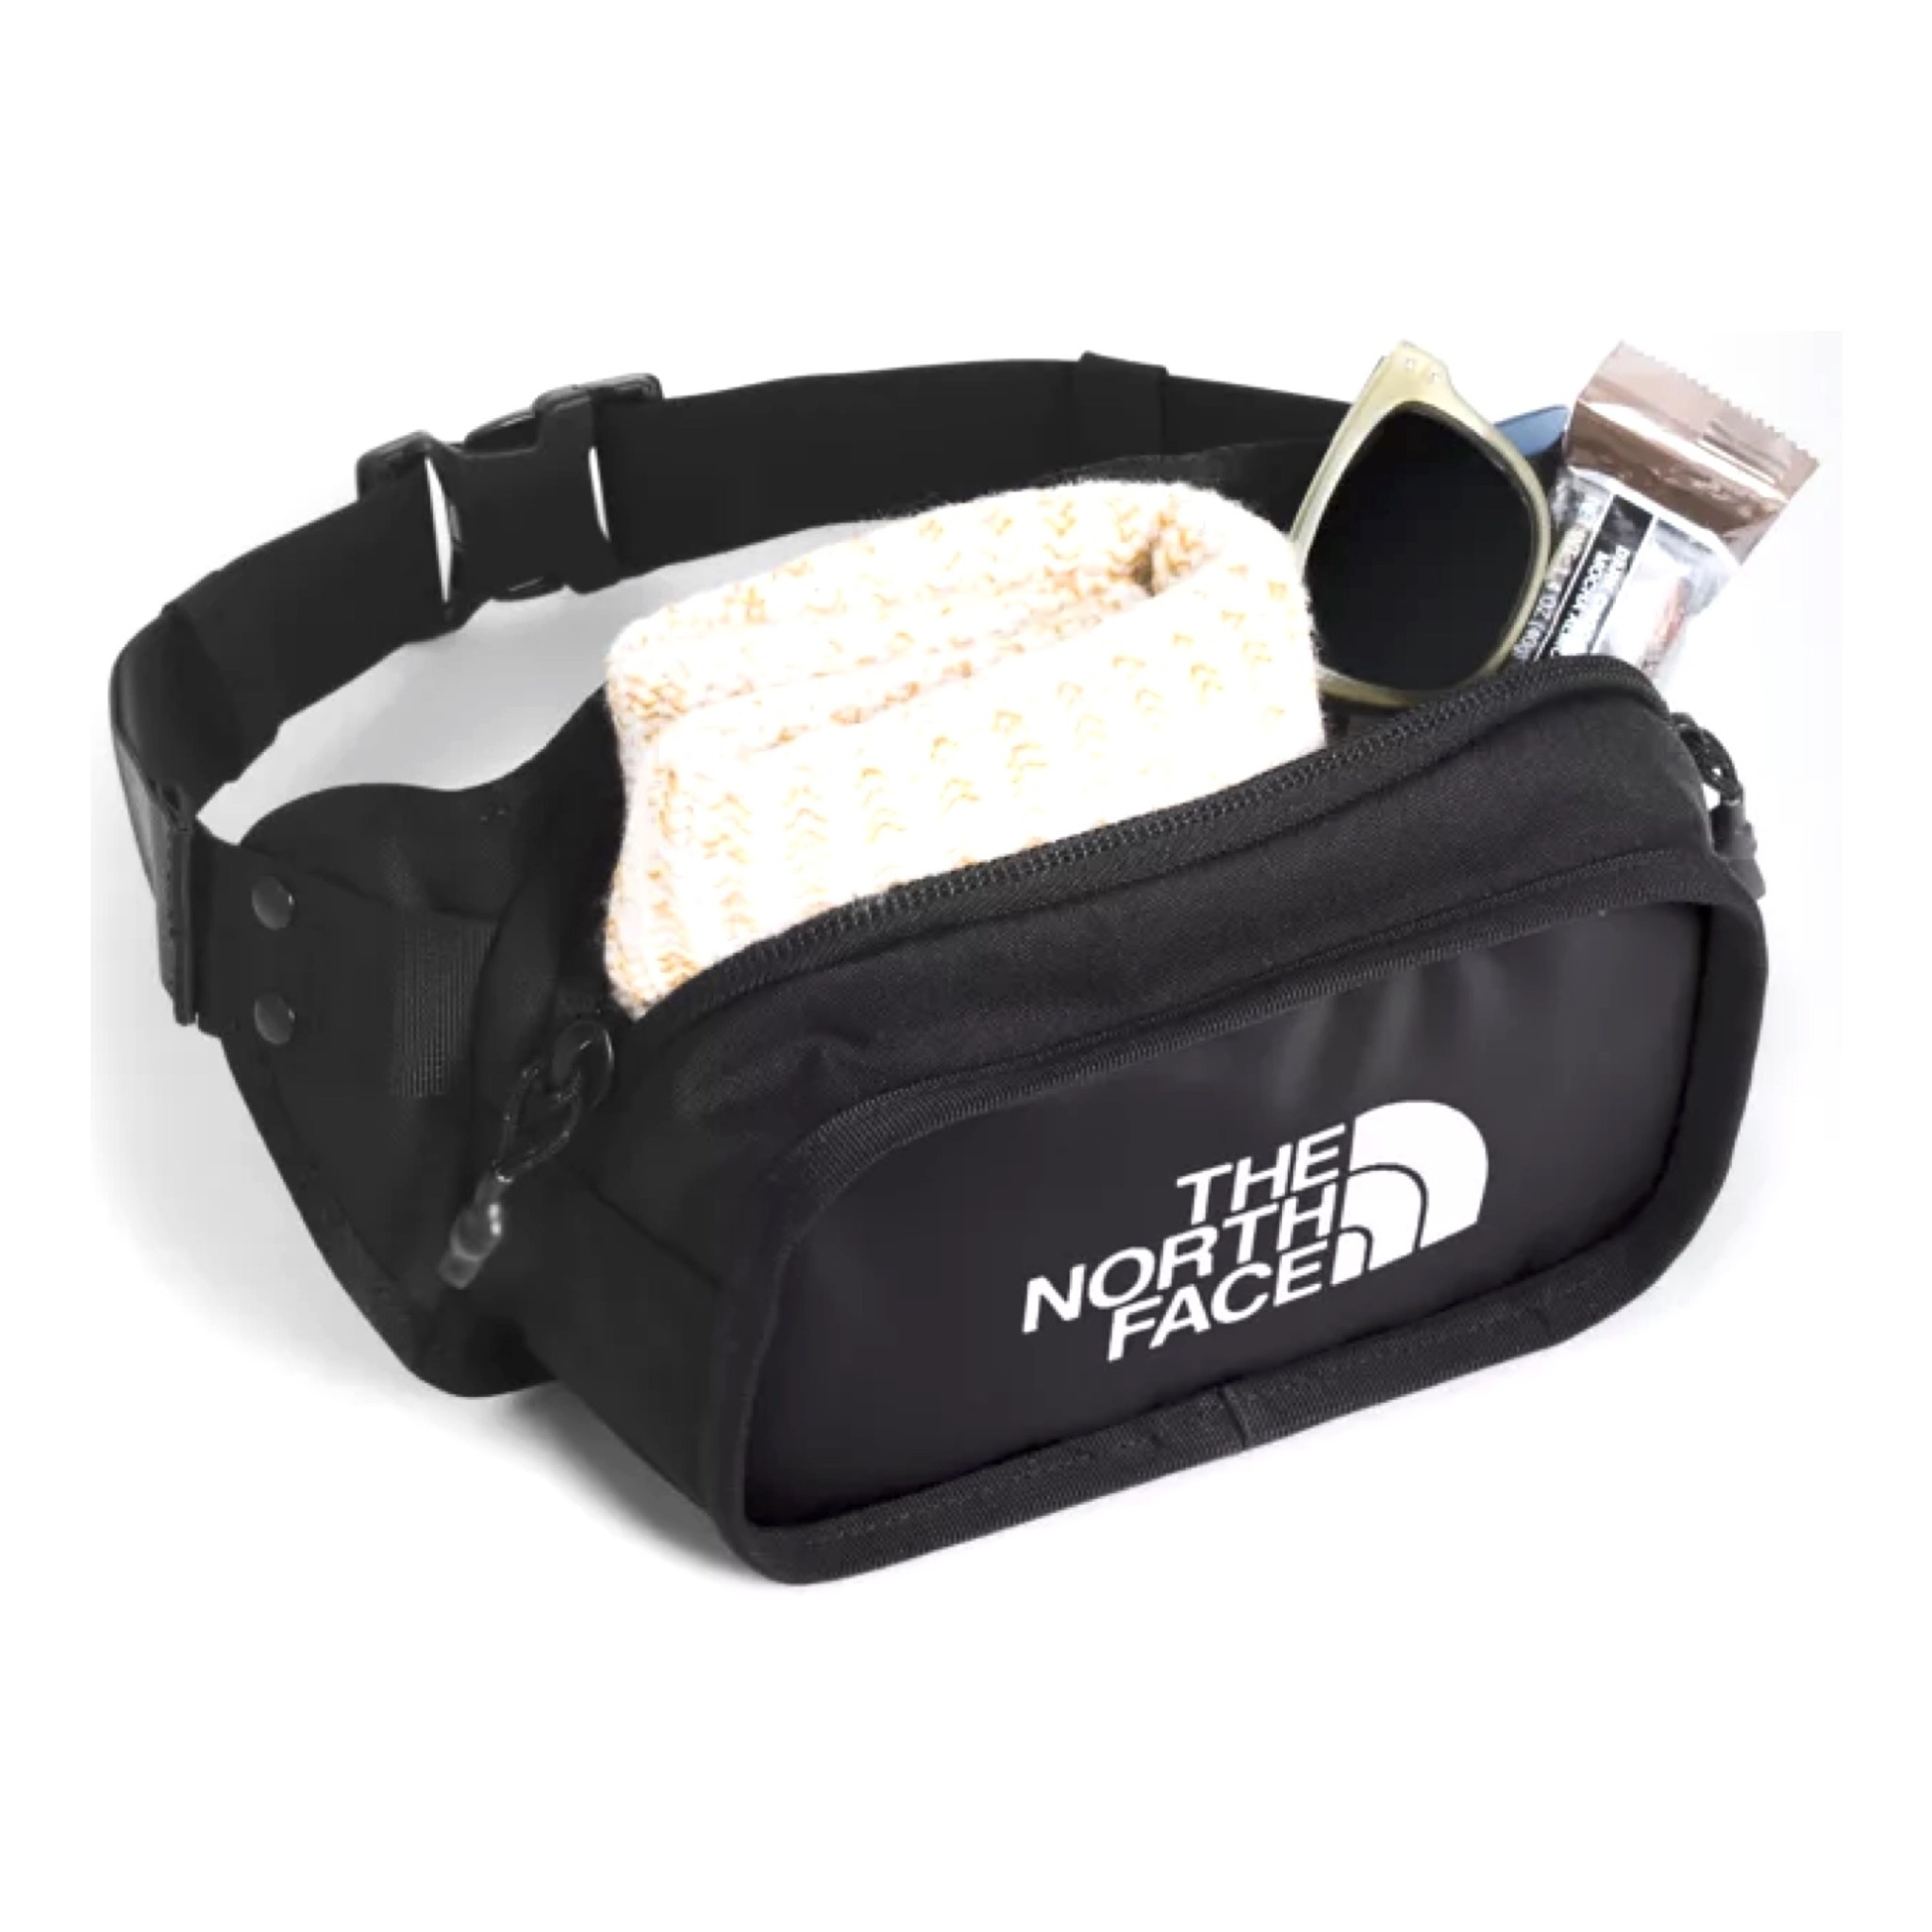 CDG x THE NORTH FACE EXPLORE HIP PACK+spbgp44.ru